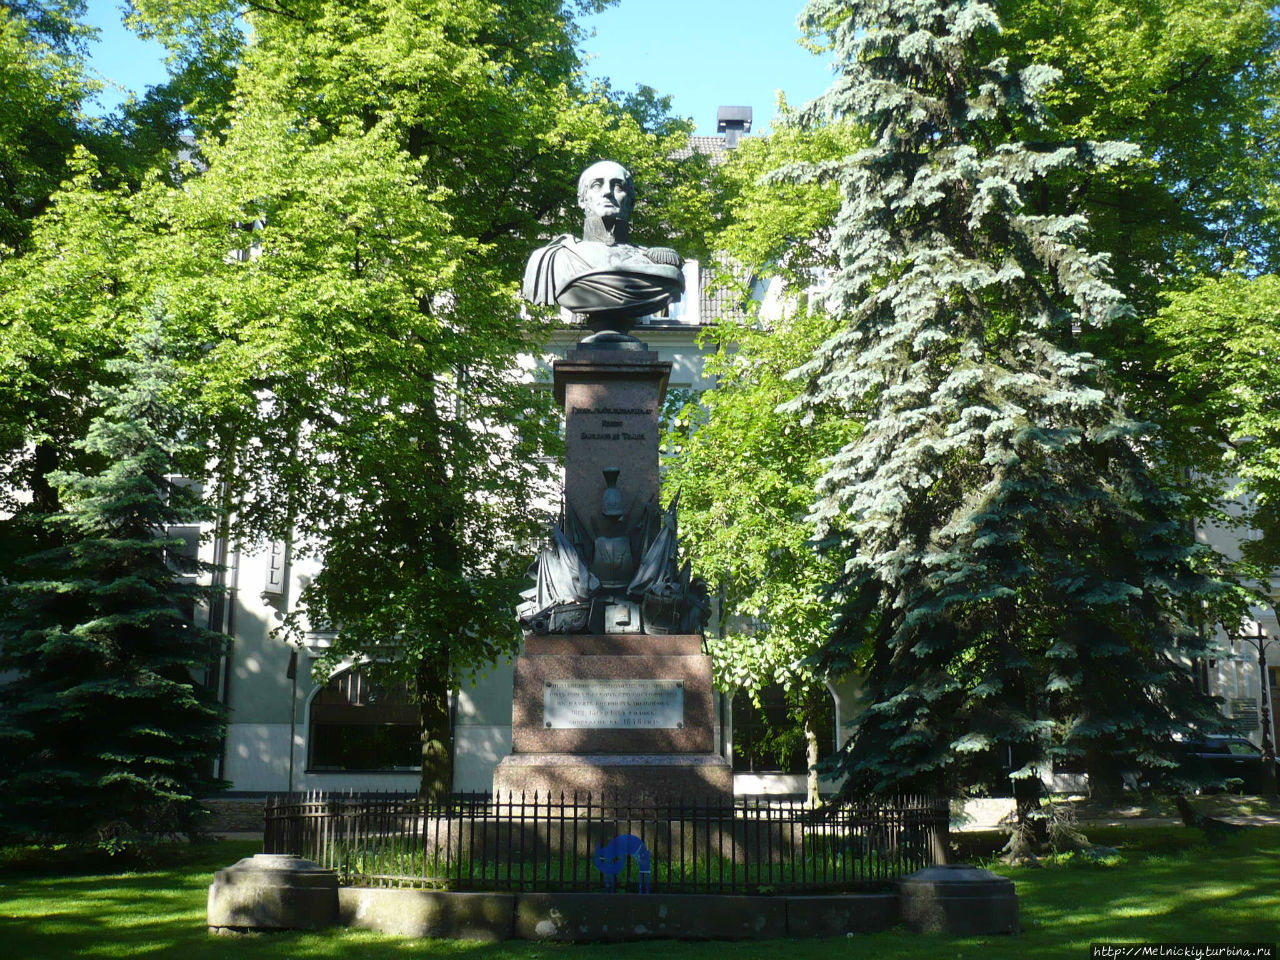 Памятник генерал-фельдмаршалу Барклаю де Толли / The monument to General Barclay de Tolly